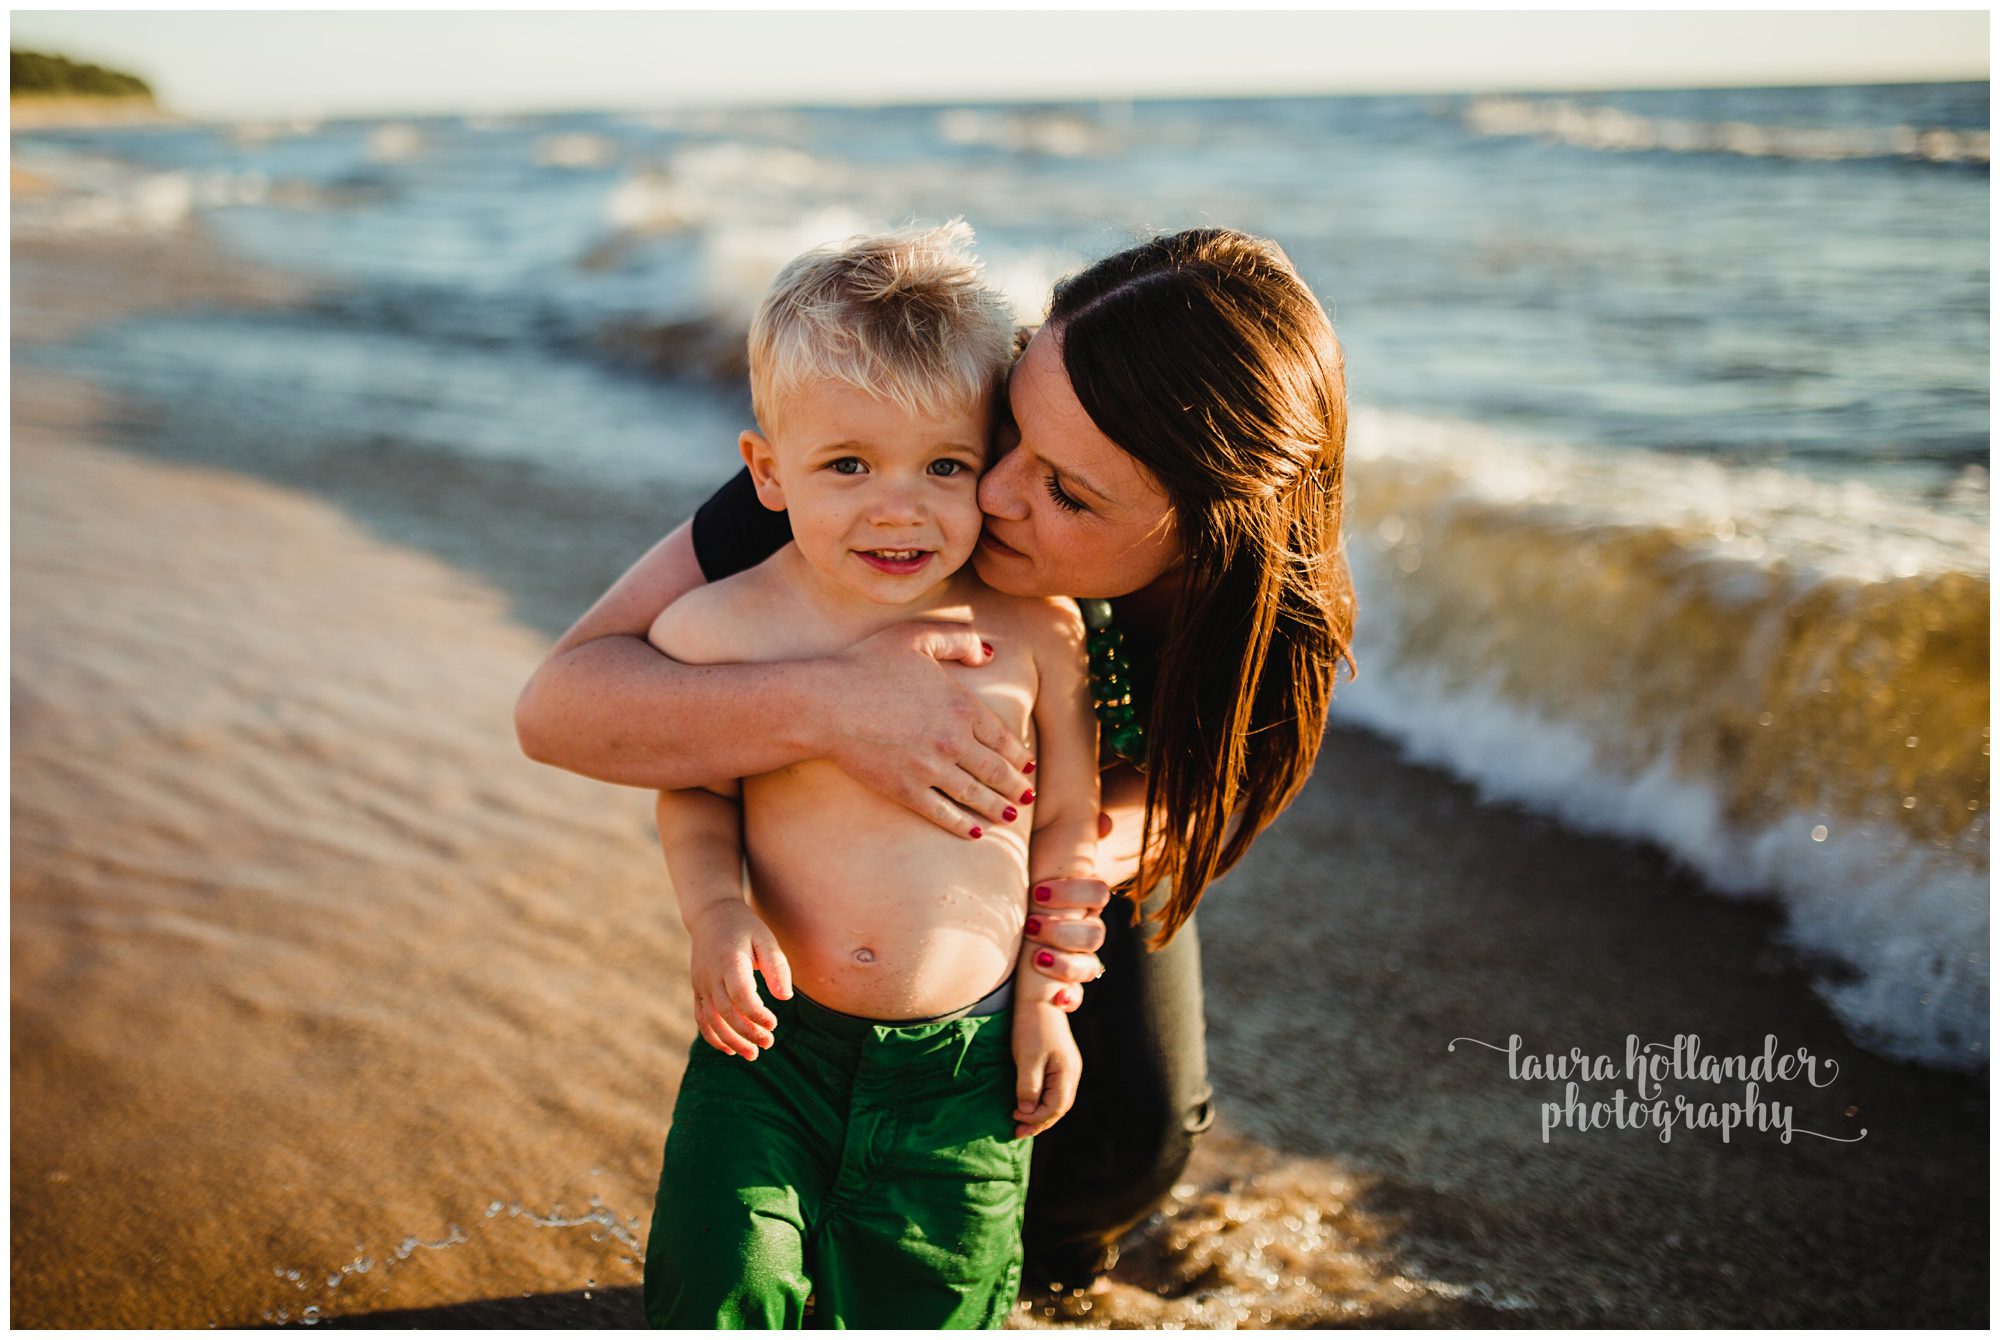 mother son photos, mother son snuggle on the beach, candid family beach portraits, what to wear beach portraits, Oval Beach Saugatuck, Laura Hollander Photography, west Michigan photographer